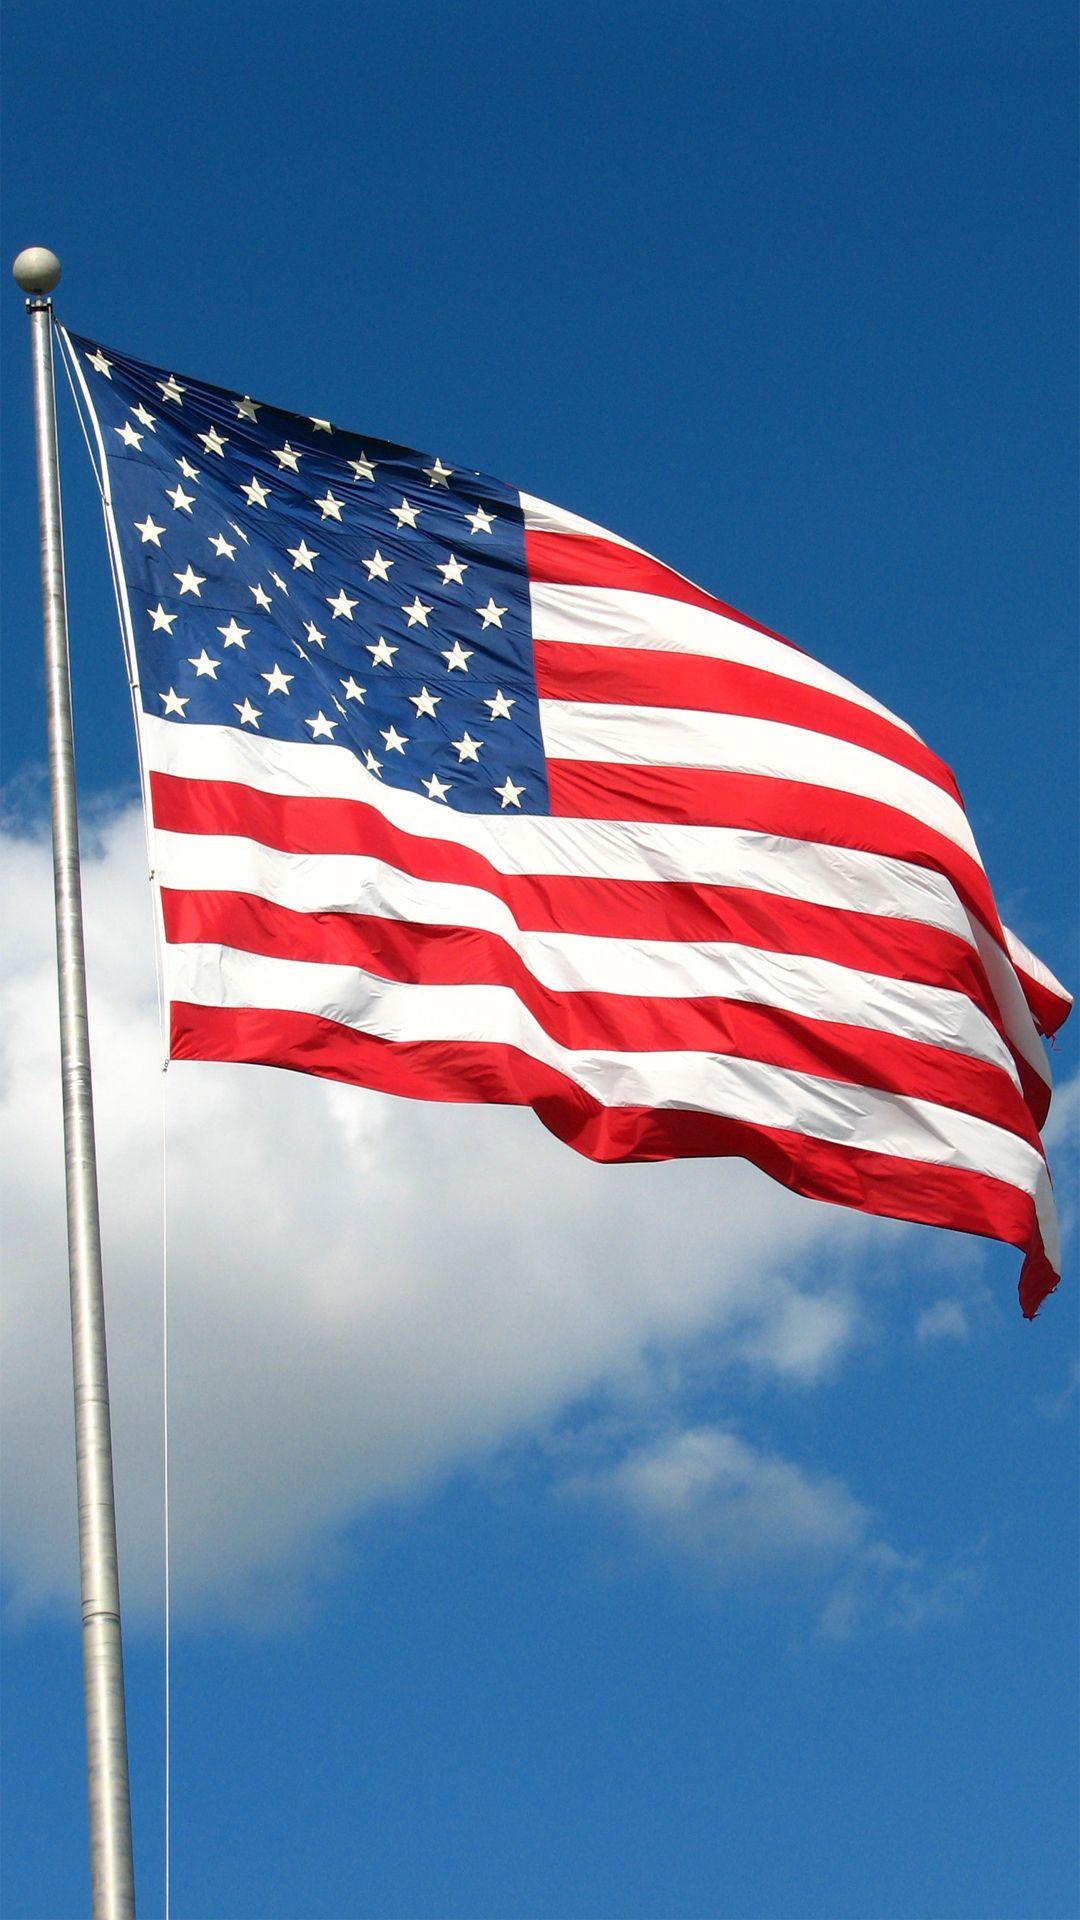 USA American Flag Sky Android Wallpaper free download